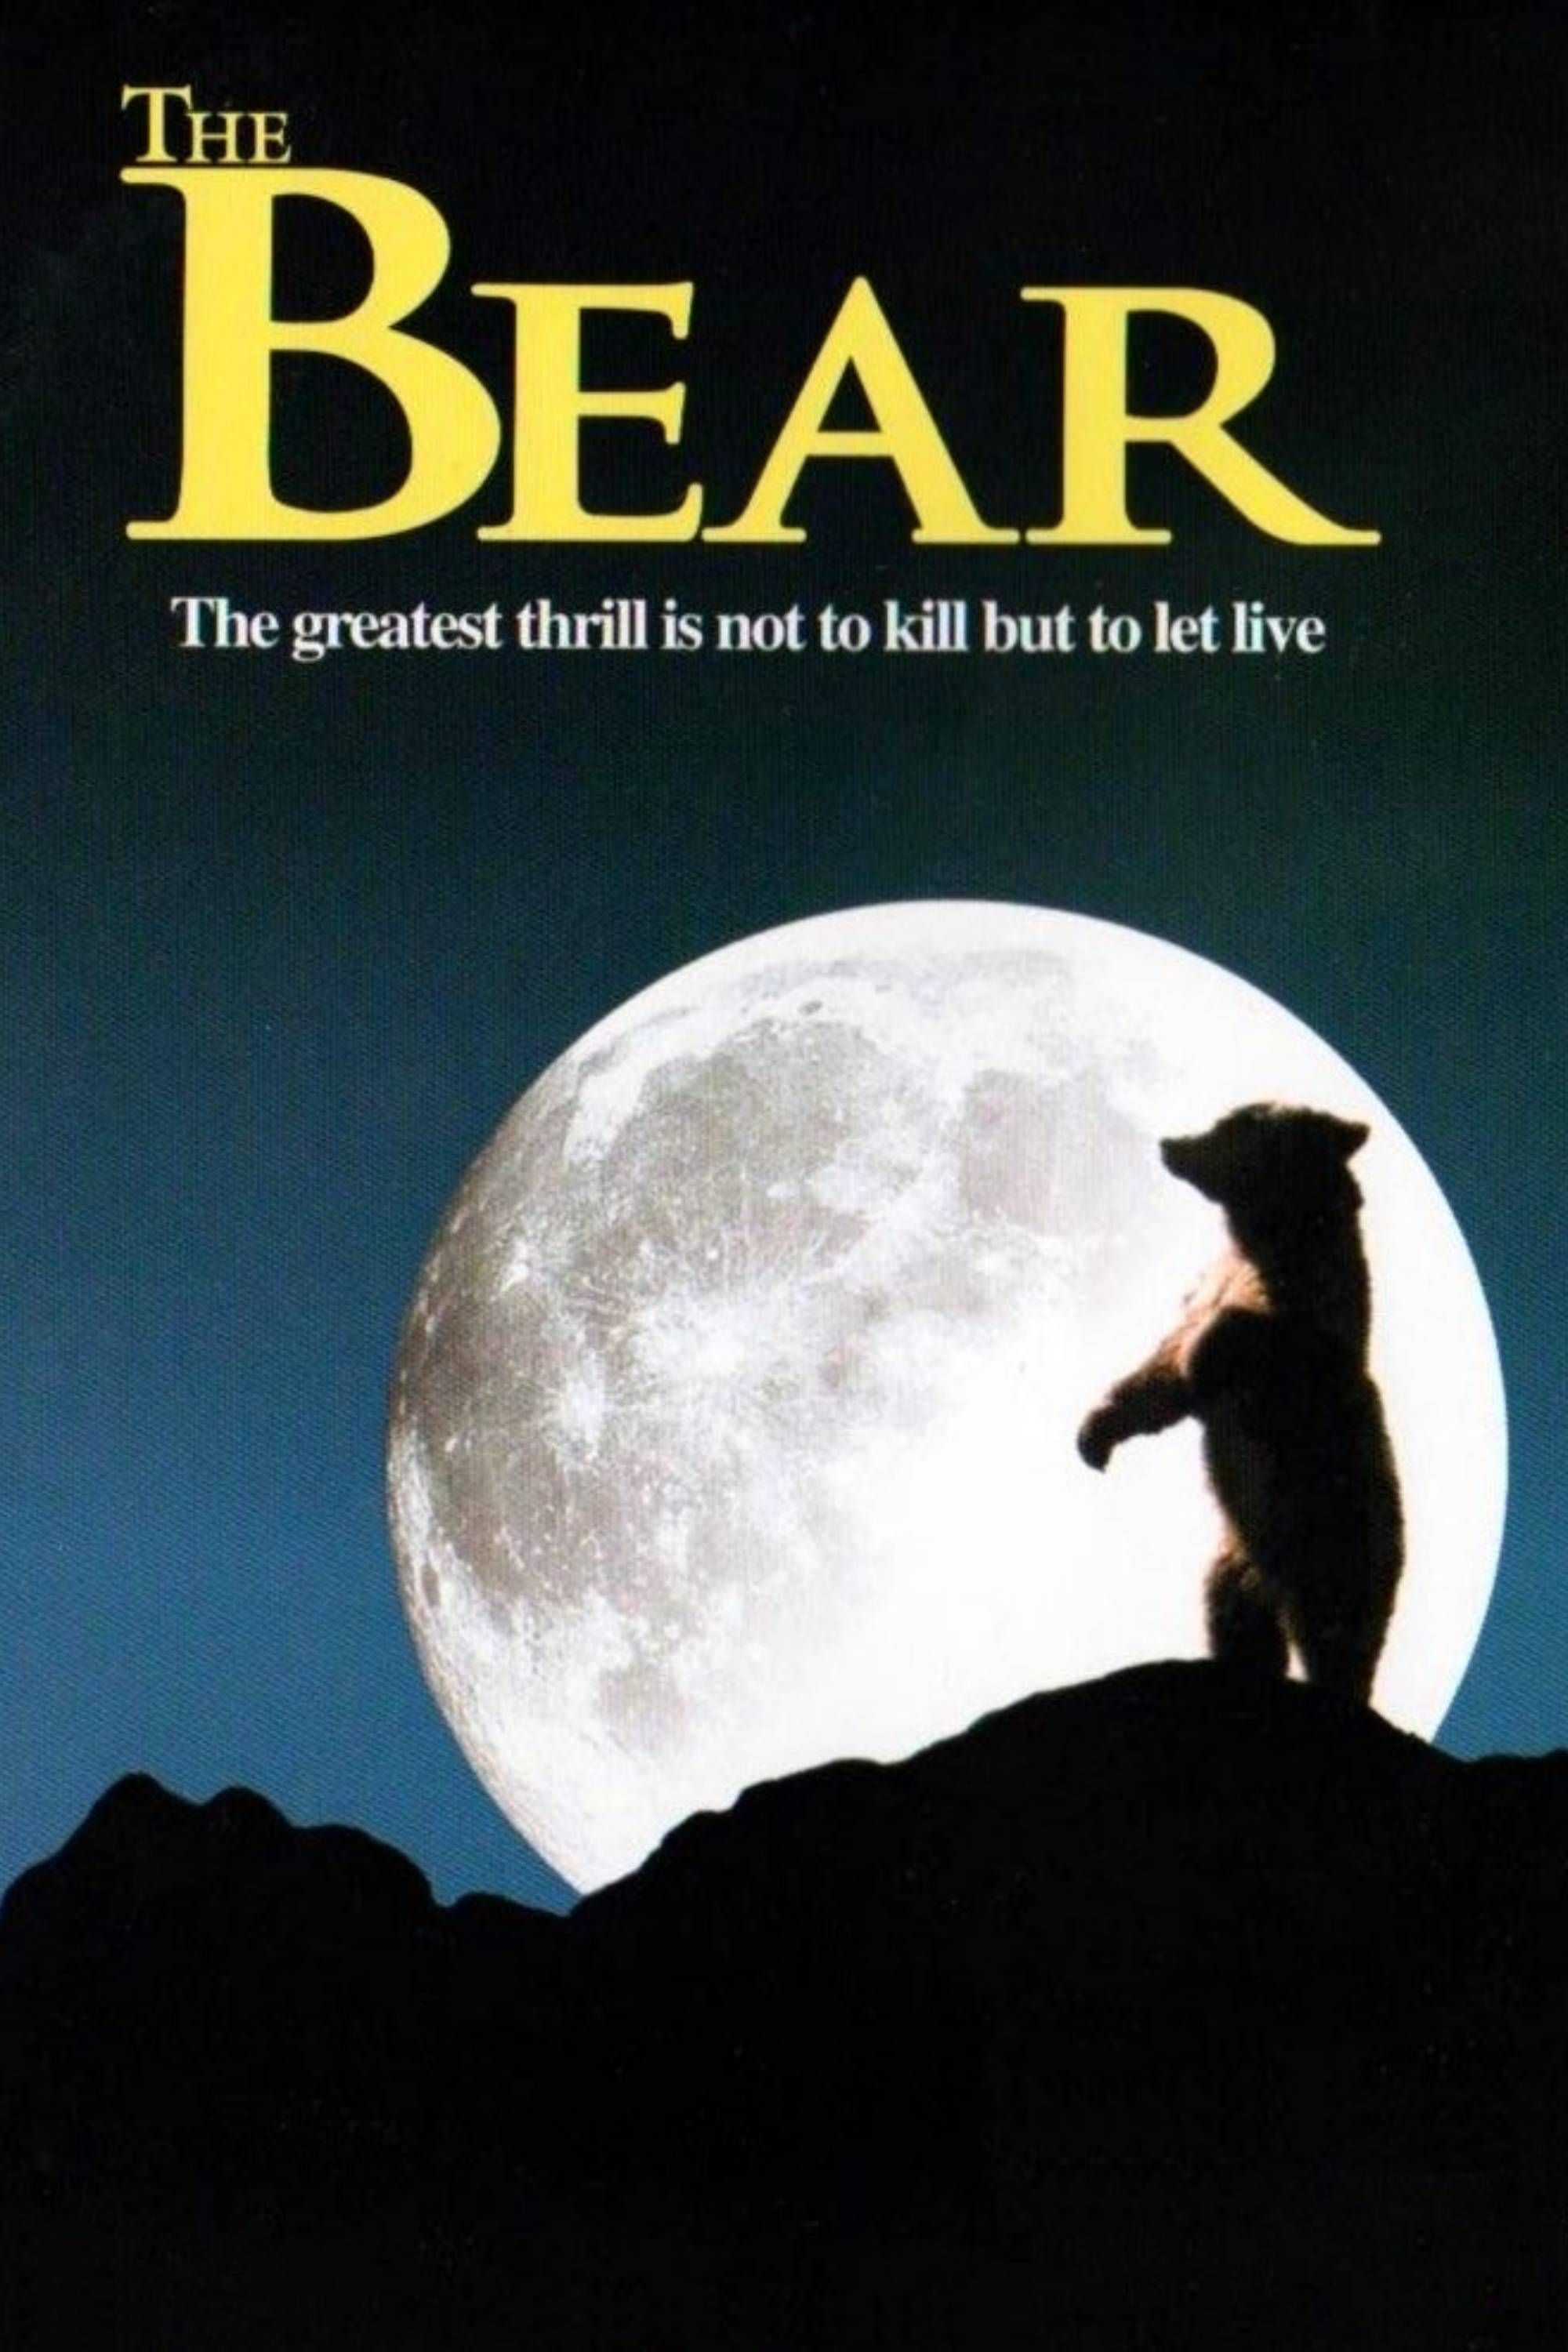 The Bear (1988) - Poster